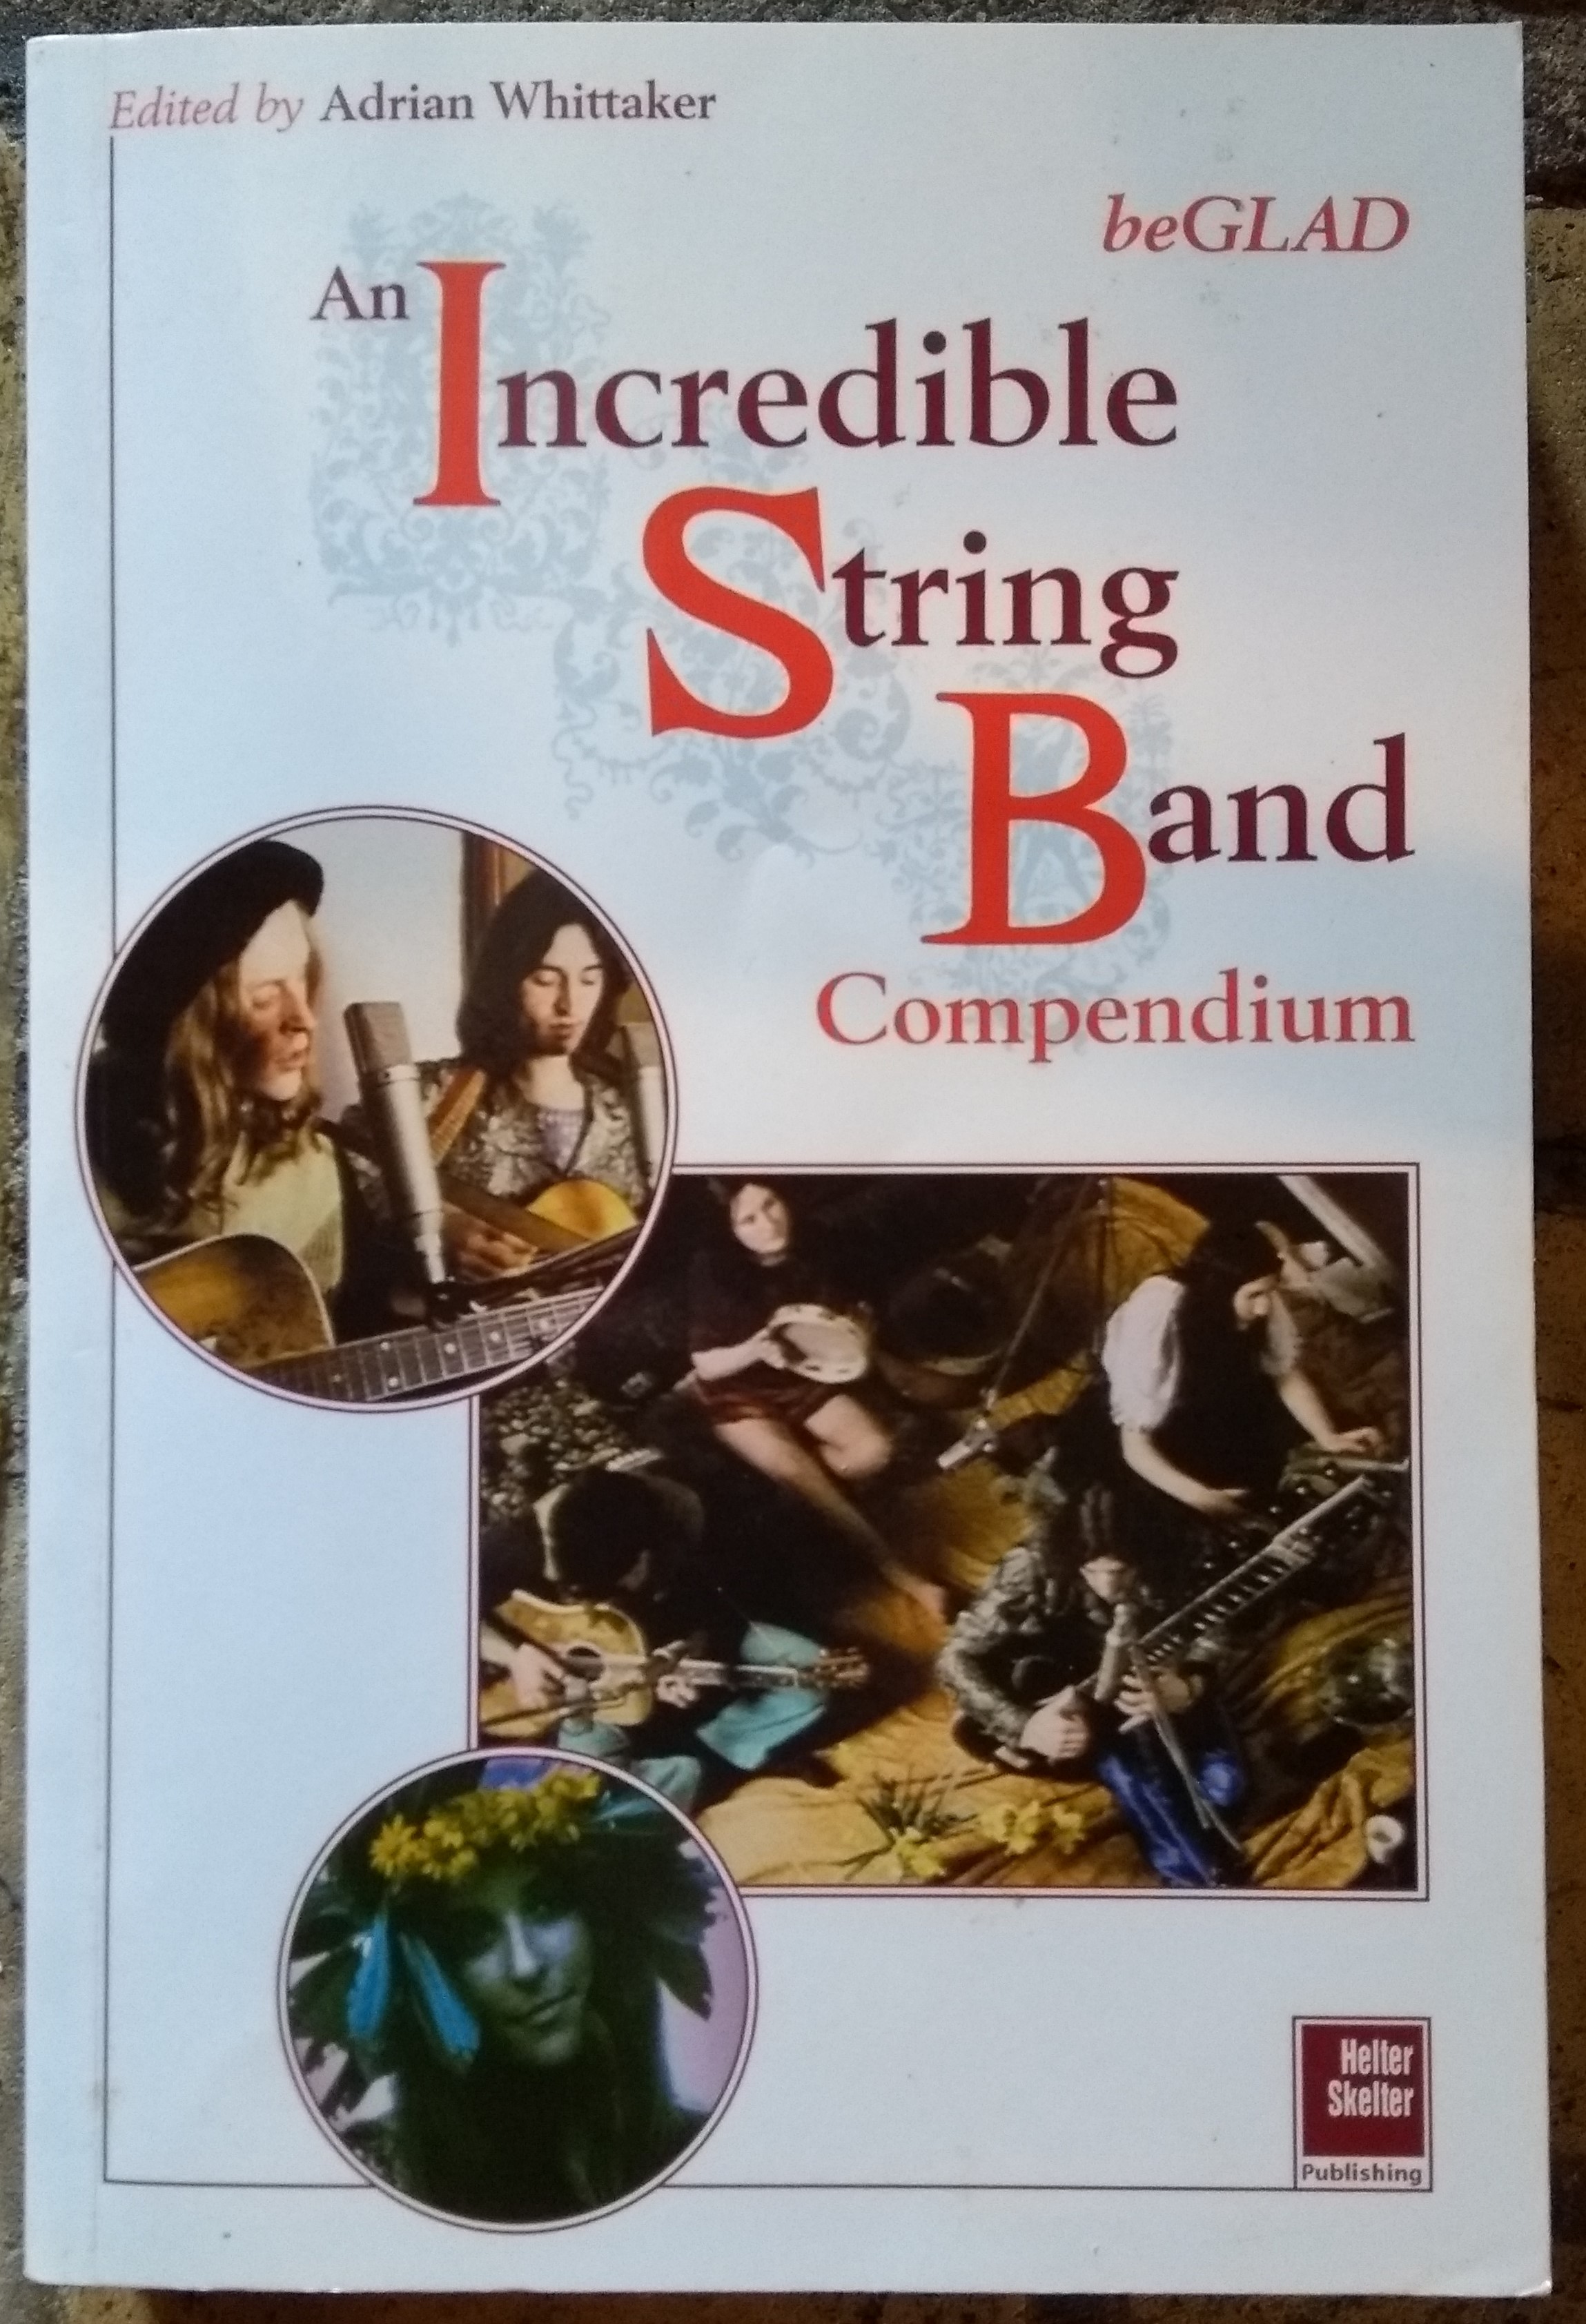 Be Glad: An Incredible String Band Compendium : Dream the World Alive - Whittaker, Adrian, Editor